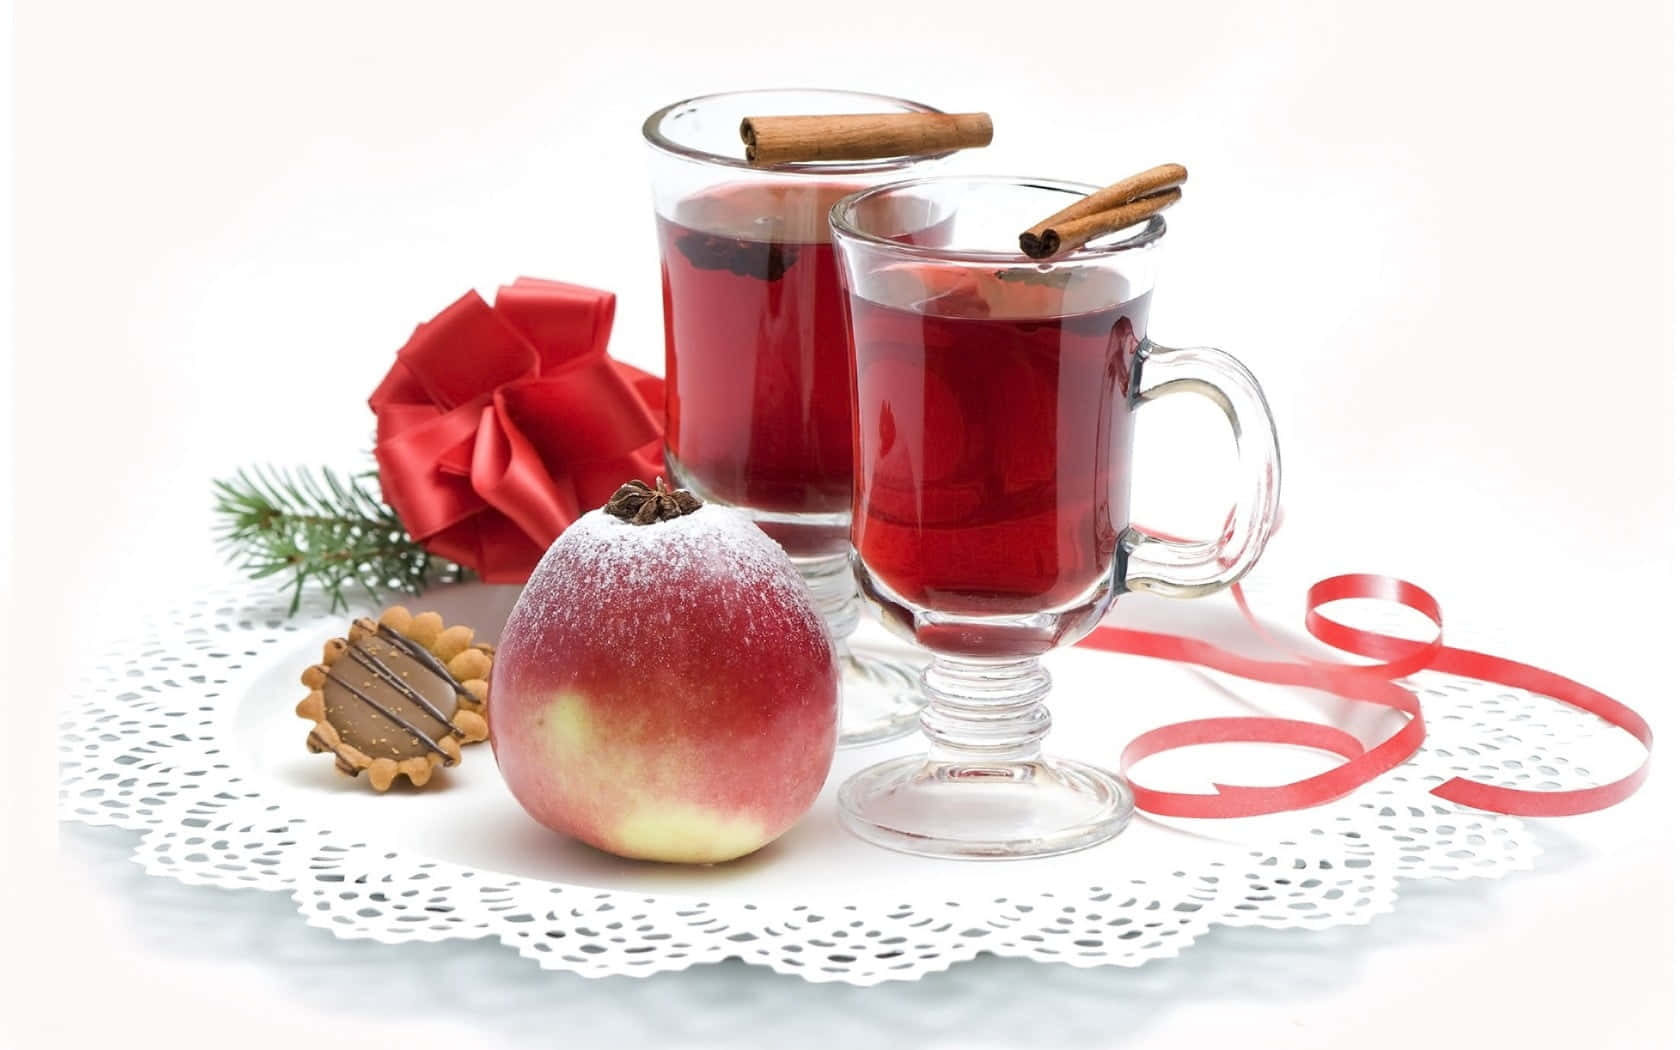 Steaming cups of delicious Mulled Wine Wallpaper